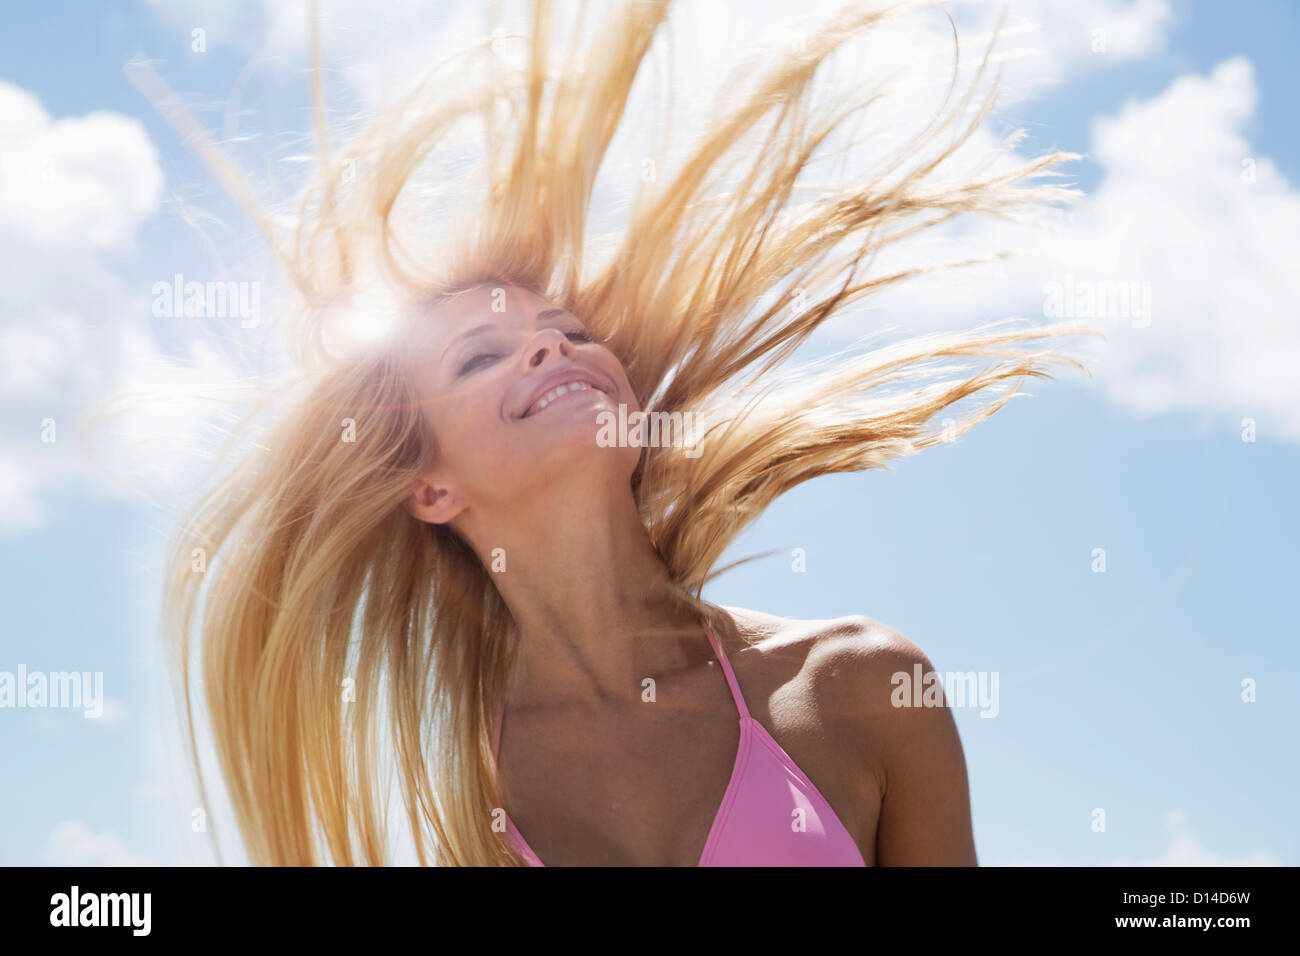 Smiling woman tossing her hair Stock Photo